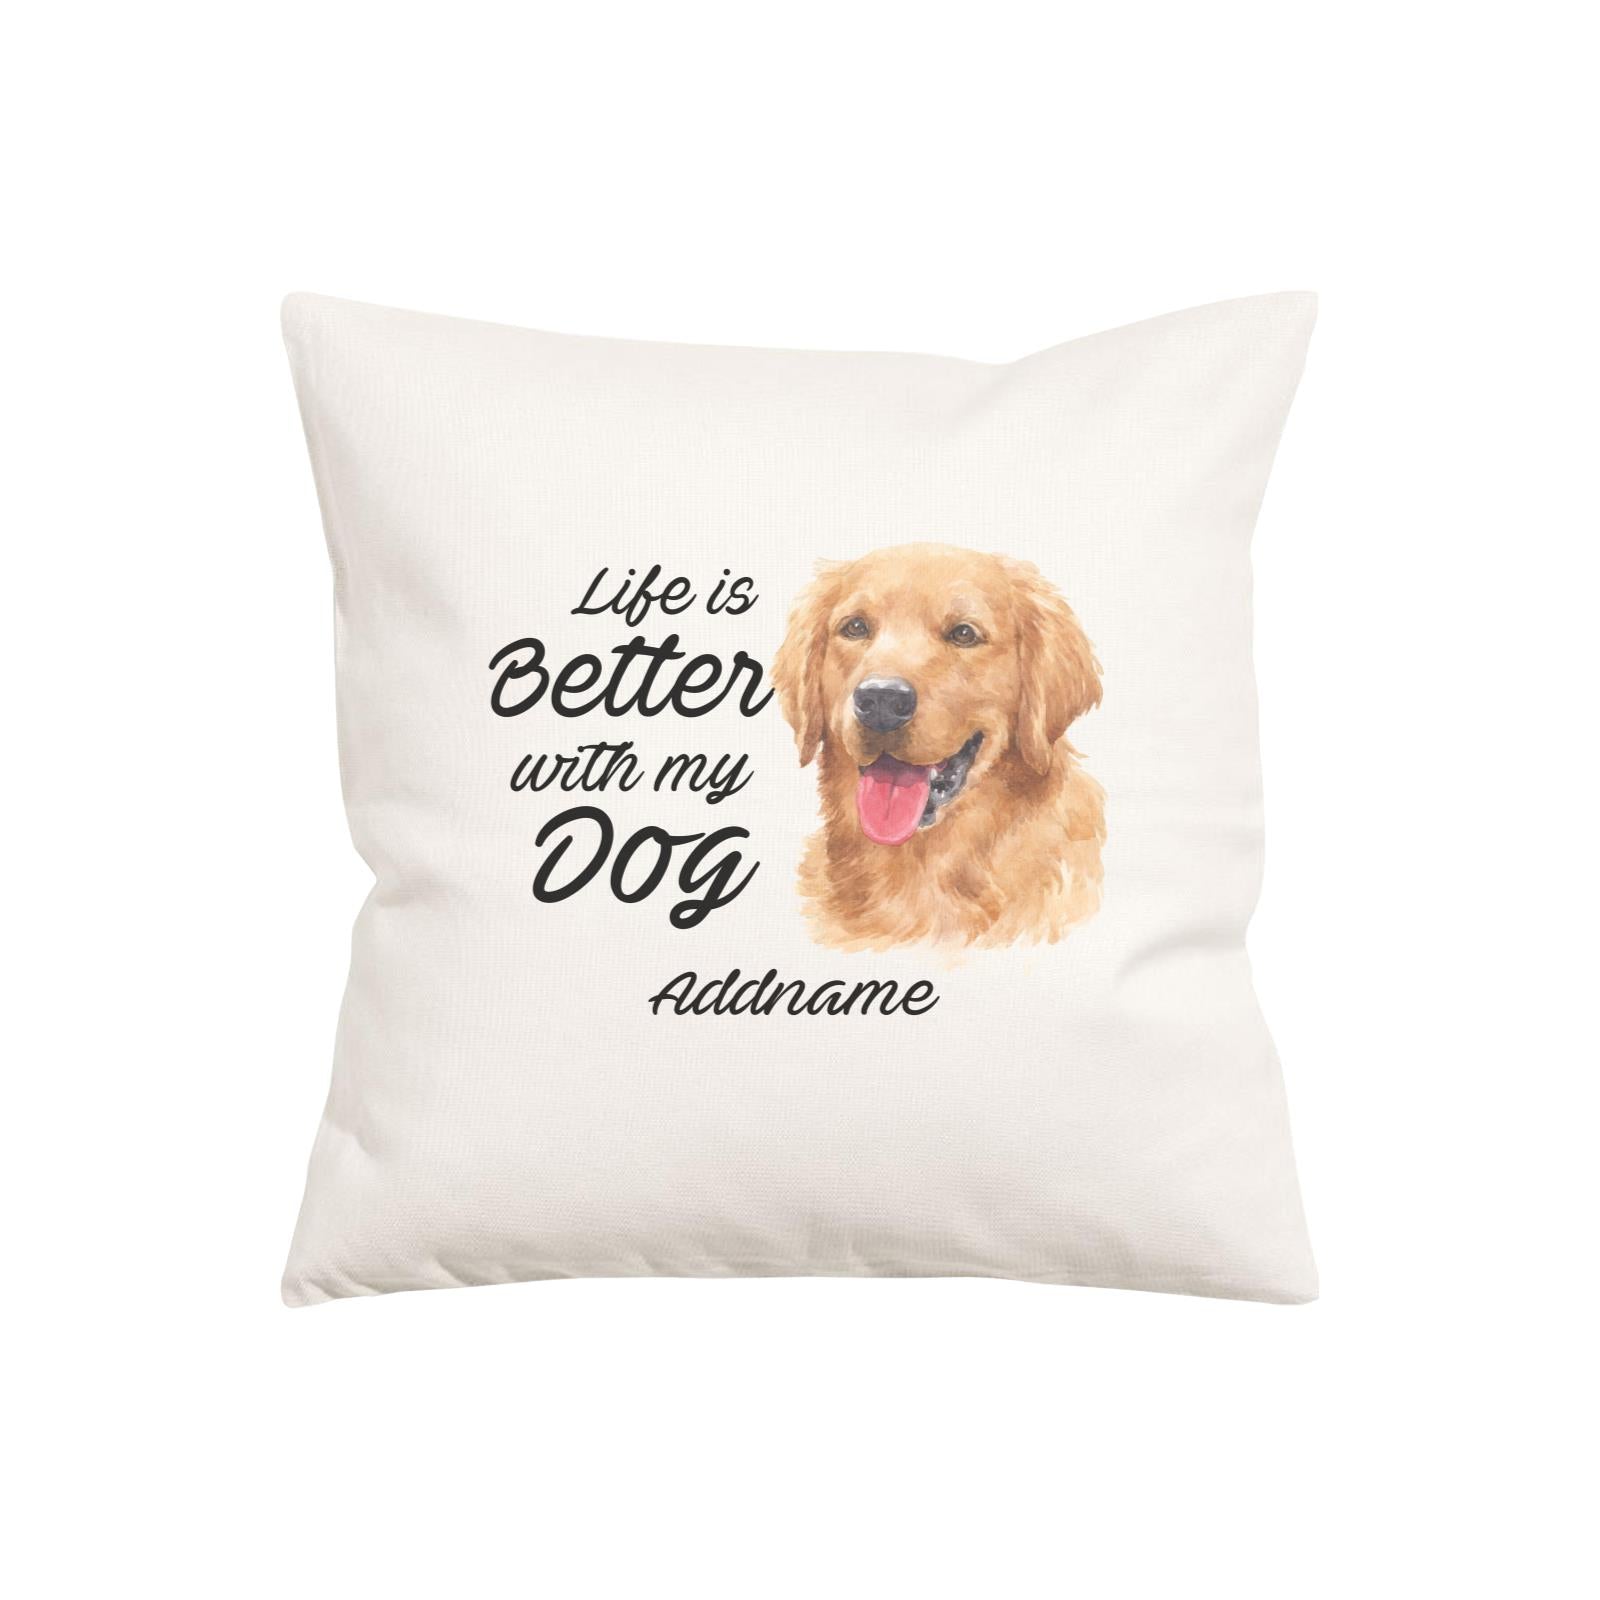 Watercolor Life is Better With My Dog Golden Retriever Addname Pillow Cushion